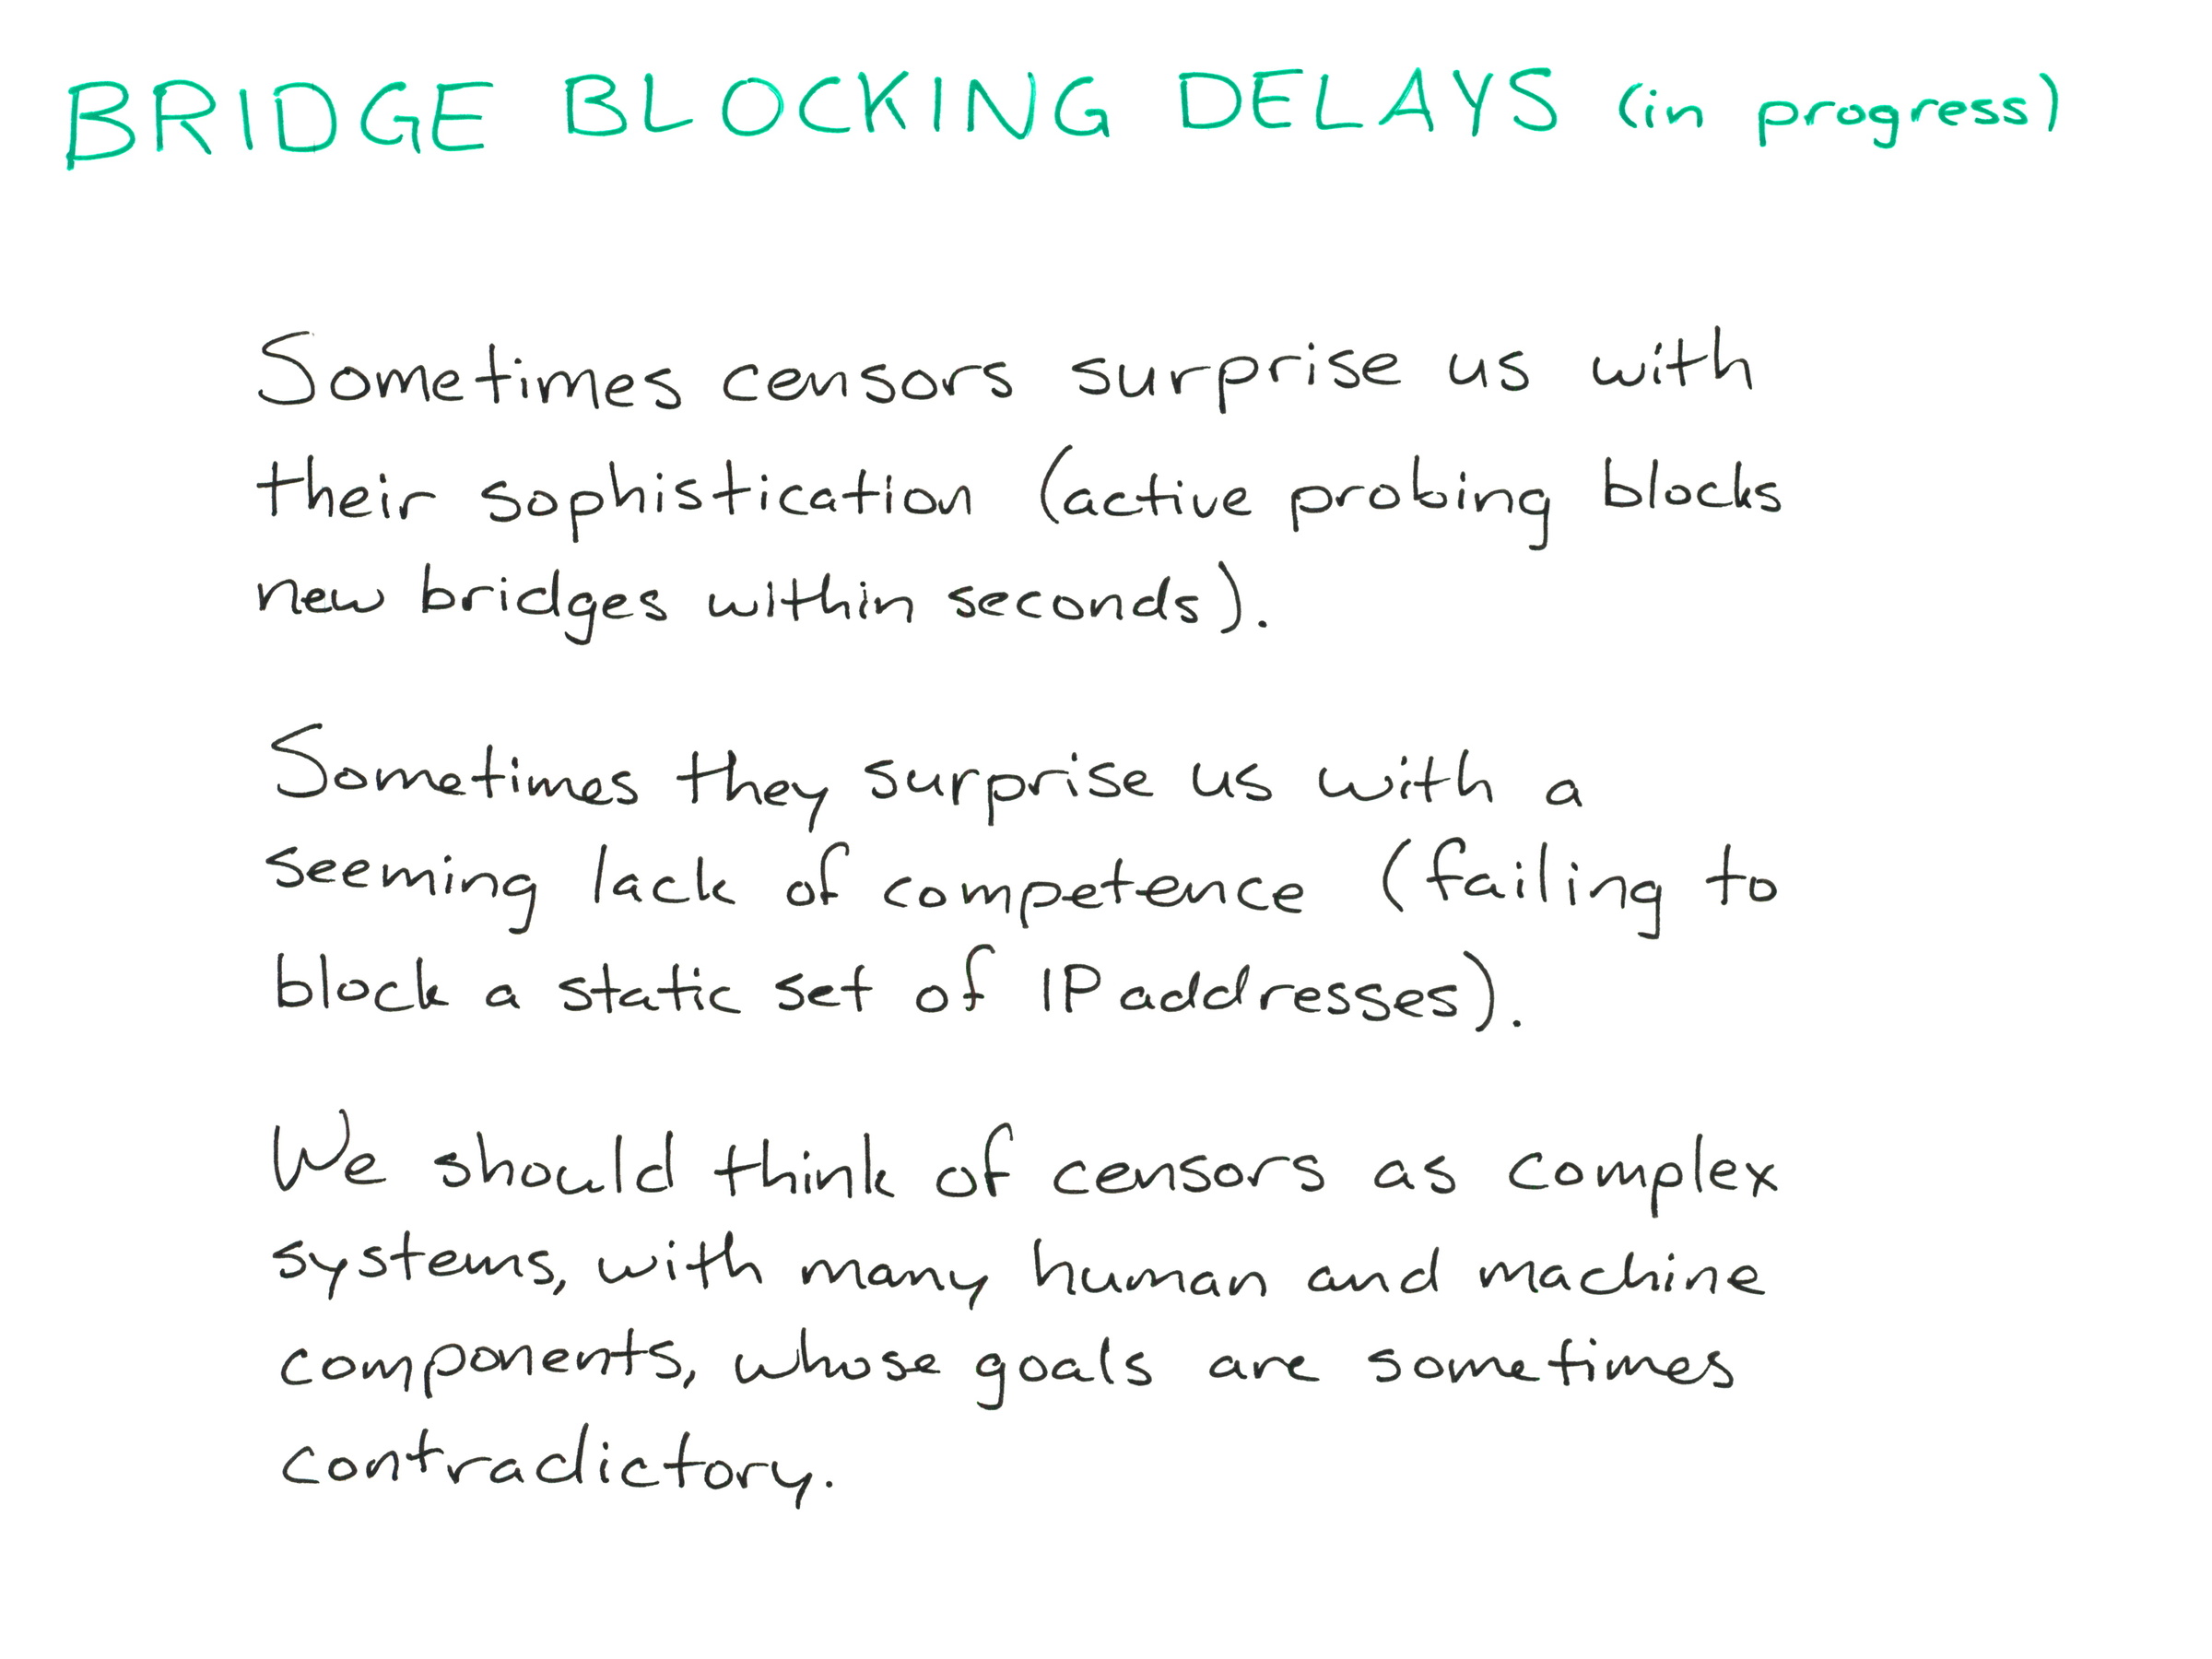 
BRIDGE BLOCKING DELAYS (in progress)

Sometimes censors surprise us with their sophistication (active probing blocks new bridges within seconds).

Sometimes they surprise us with a seeming lack of competence (failing to block a static set of IP addresses).

We should think of censors as complex systems, with many human and machine components, whose goals are sometimes contradictory.
